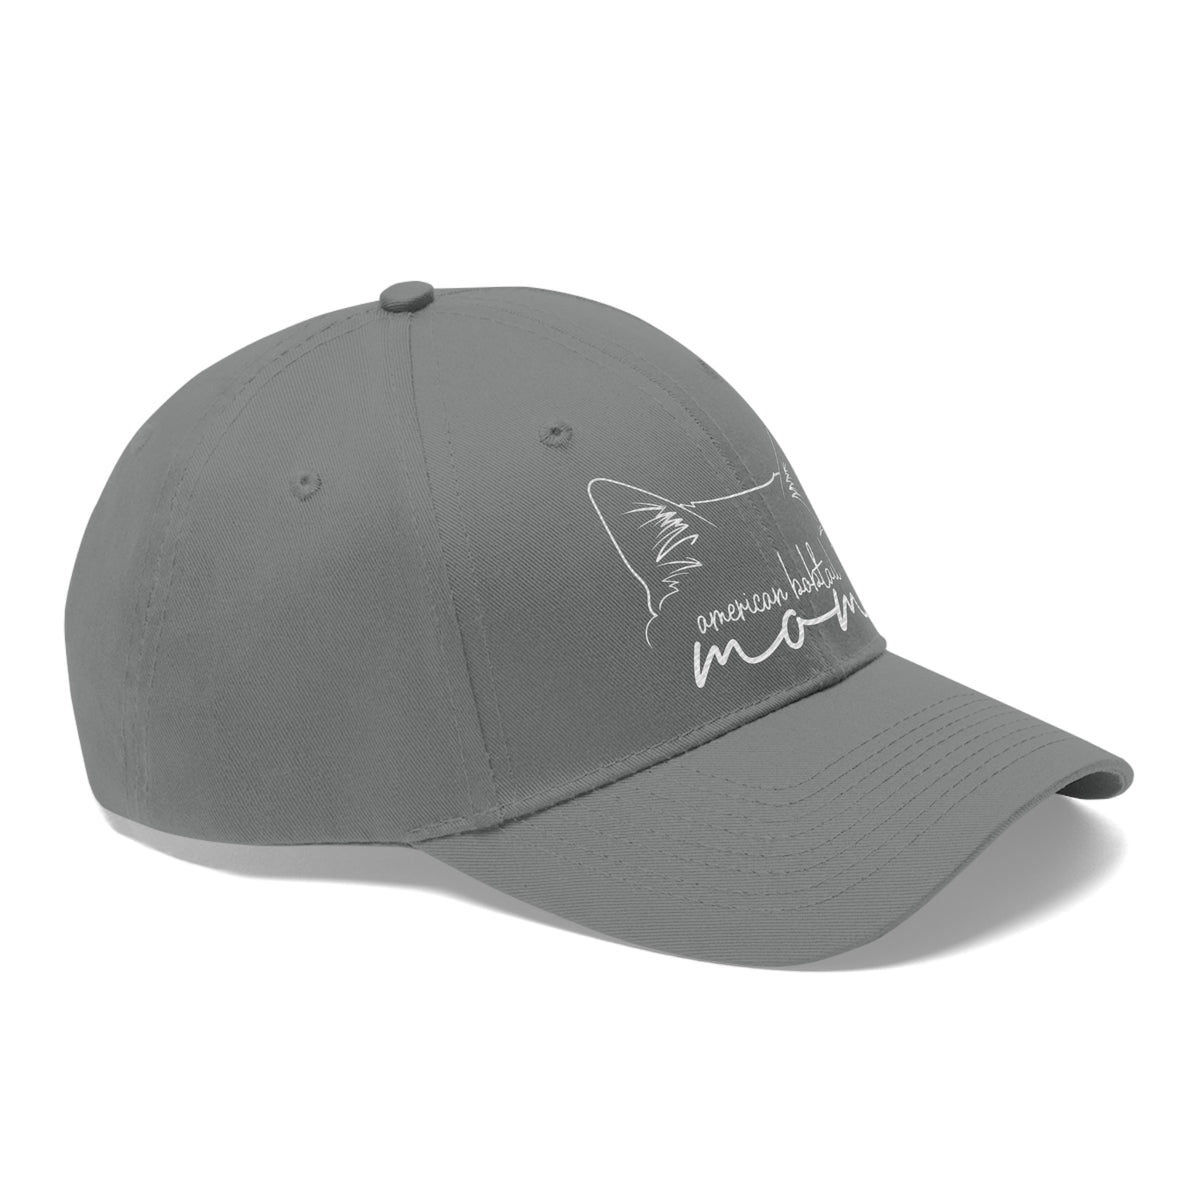 American Bobtail Cat Mom Embroidered Twill Hat